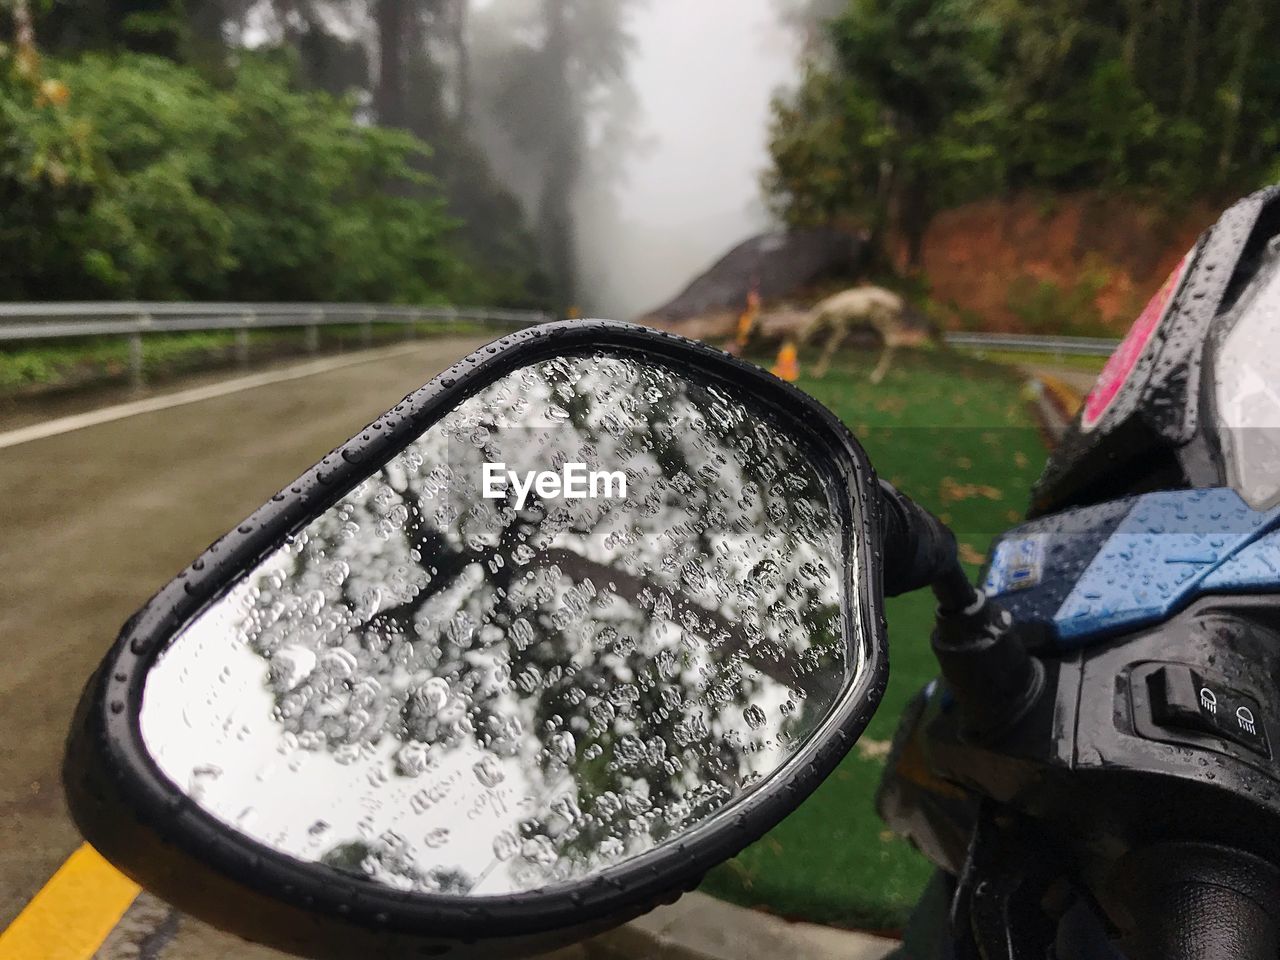 CLOSE-UP OF BICYCLE ON SIDE-VIEW MIRROR AGAINST CAR